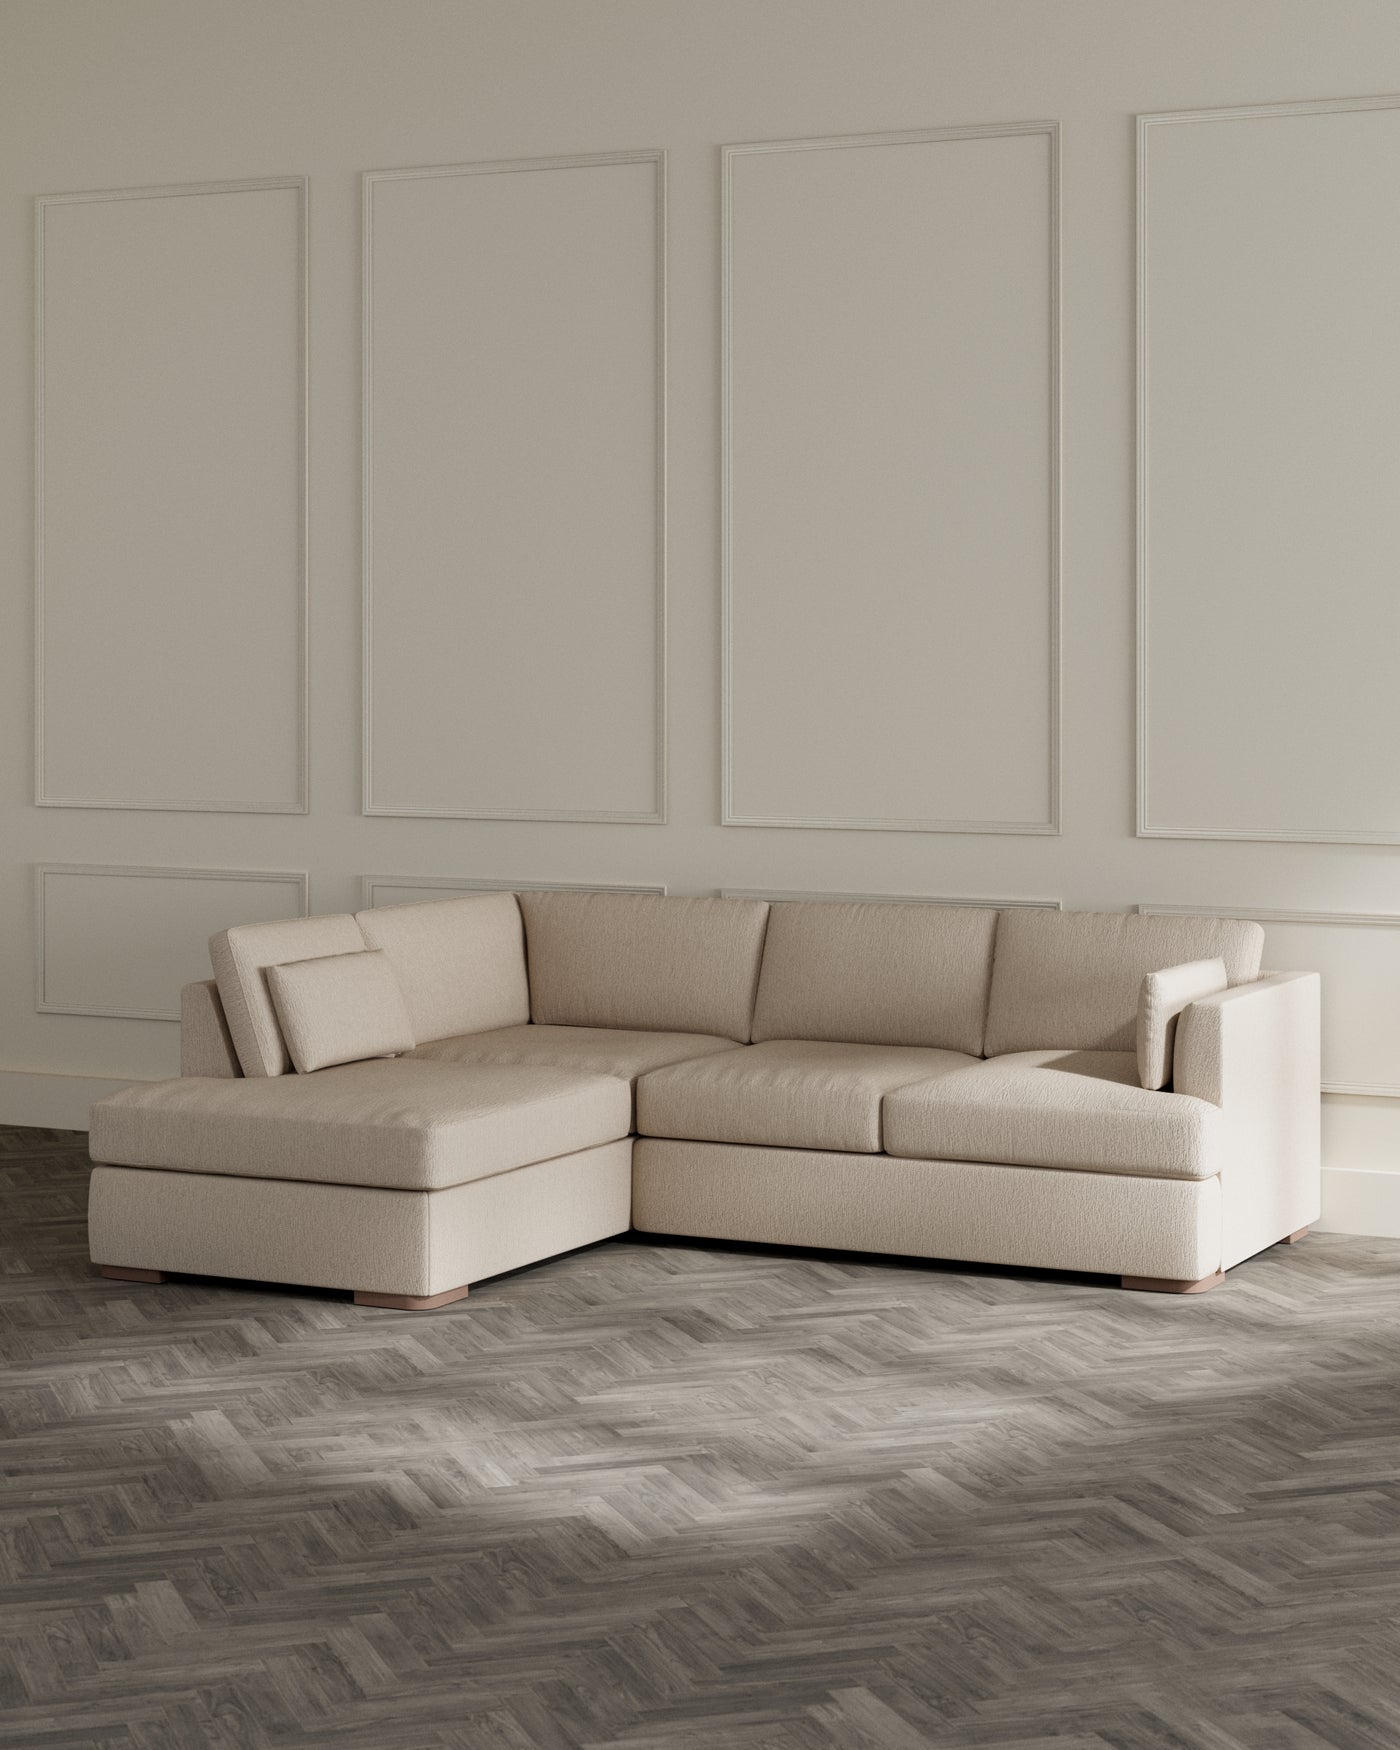 Beige L-shaped sectional sofa with chaise lounge and fabric upholstery displayed in a minimalist room with panelled walls and herringbone wood flooring.